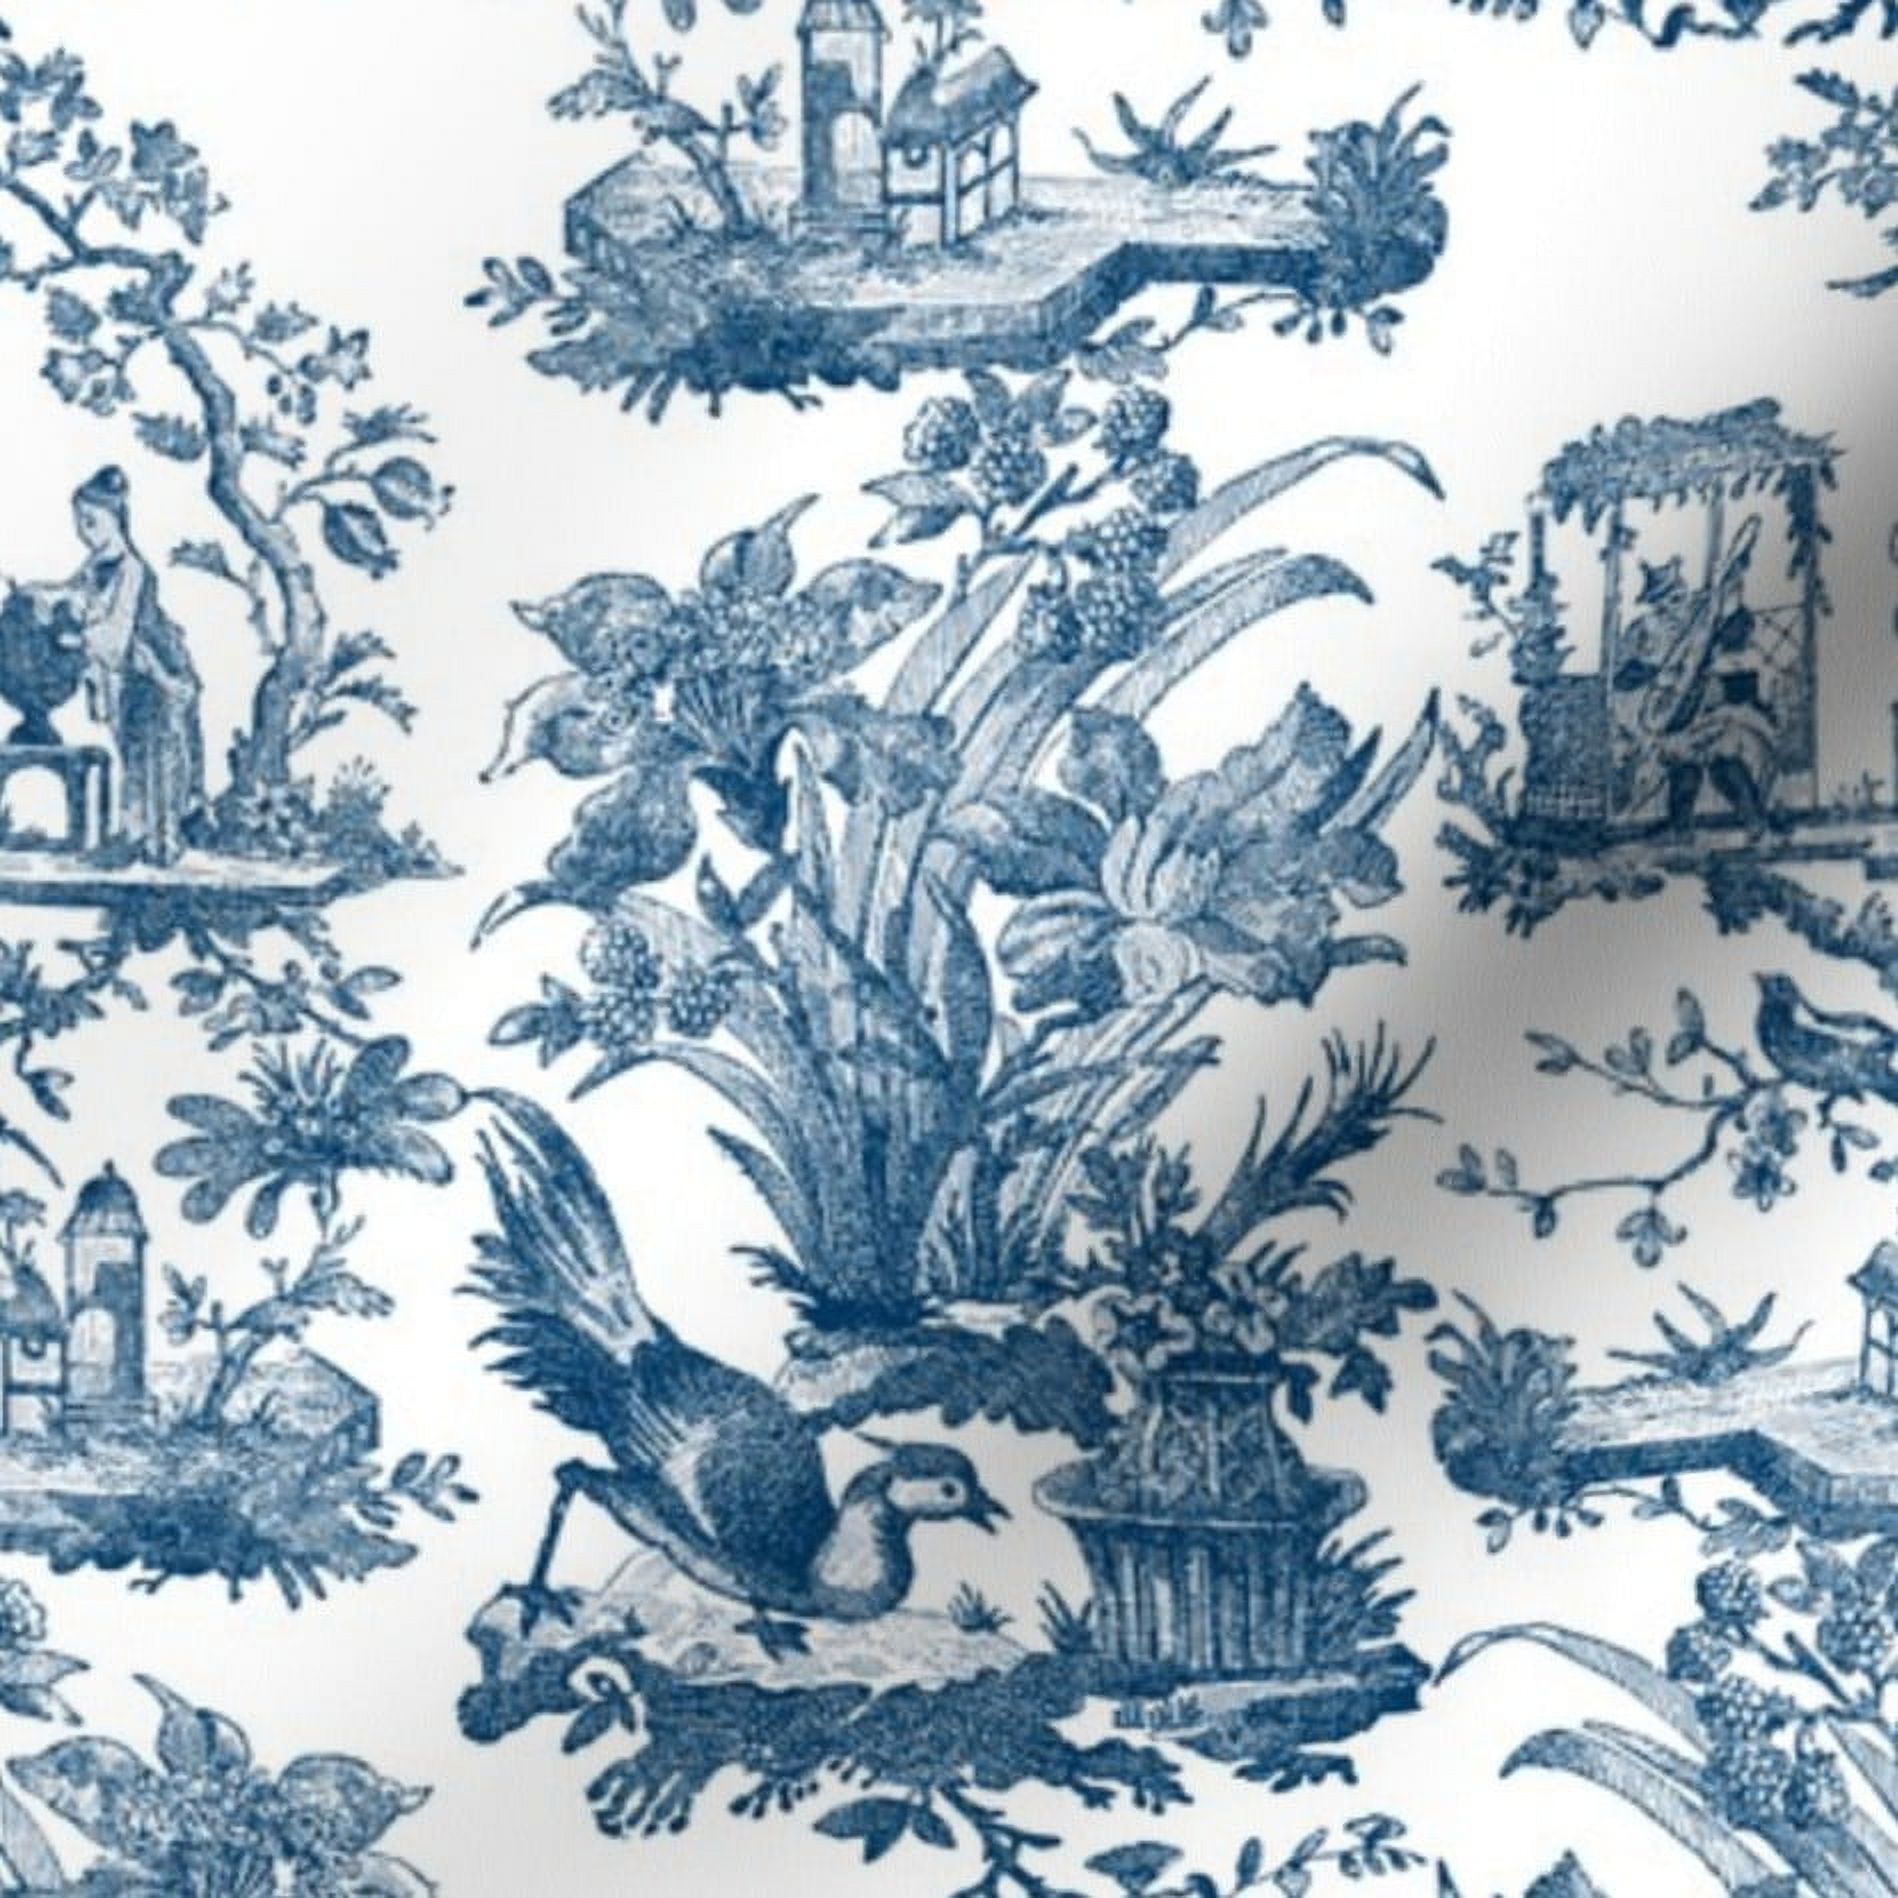 PRINTABLE FABRIC SET for Quarter Scale Miniature Chinoiserie